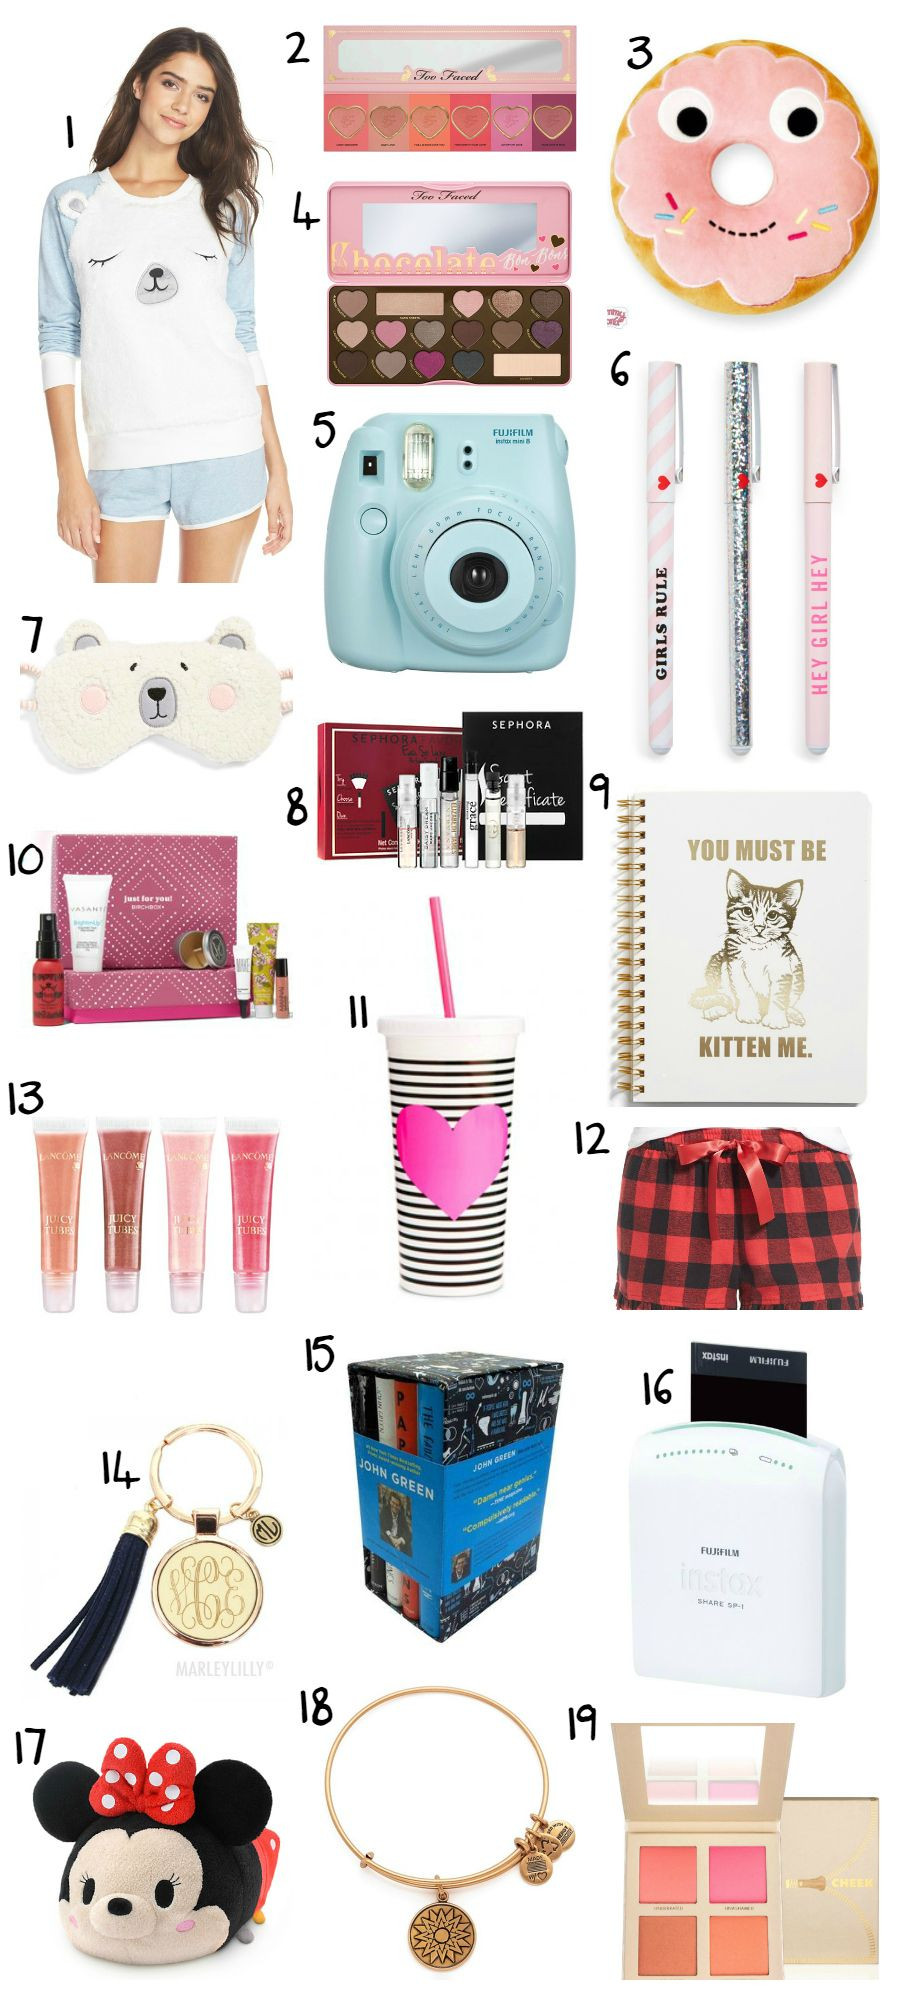 Christmas Gift Ideas Girls
 The Best Christmas Gift Ideas for Teens